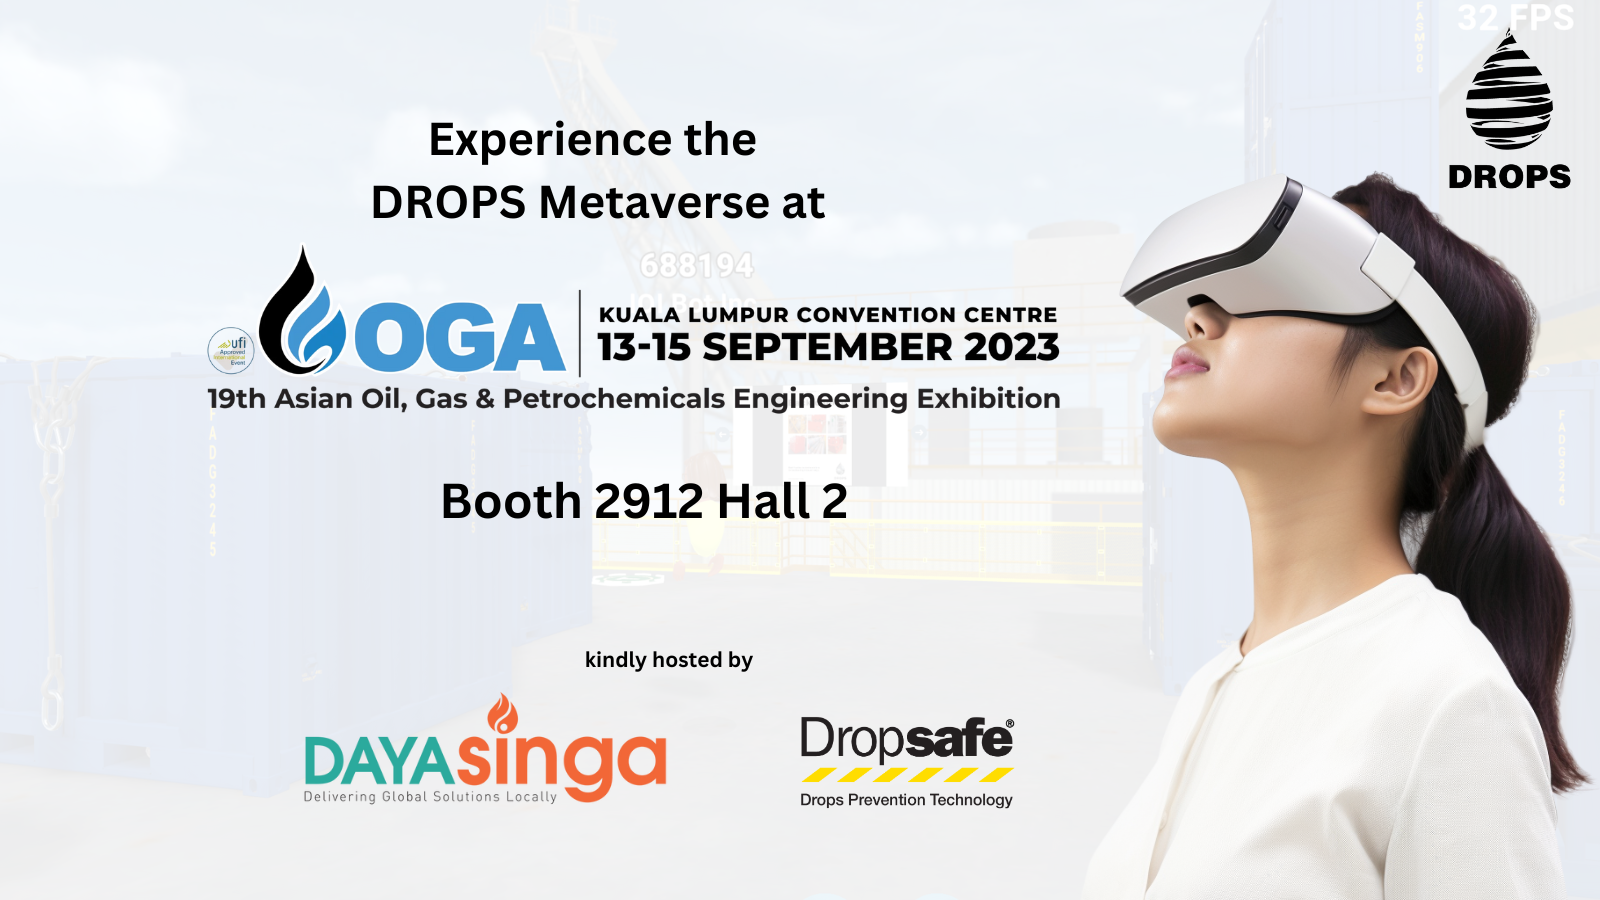 Experience the DROPS Metaverse at the OGA Conference in Kuala Lumpur